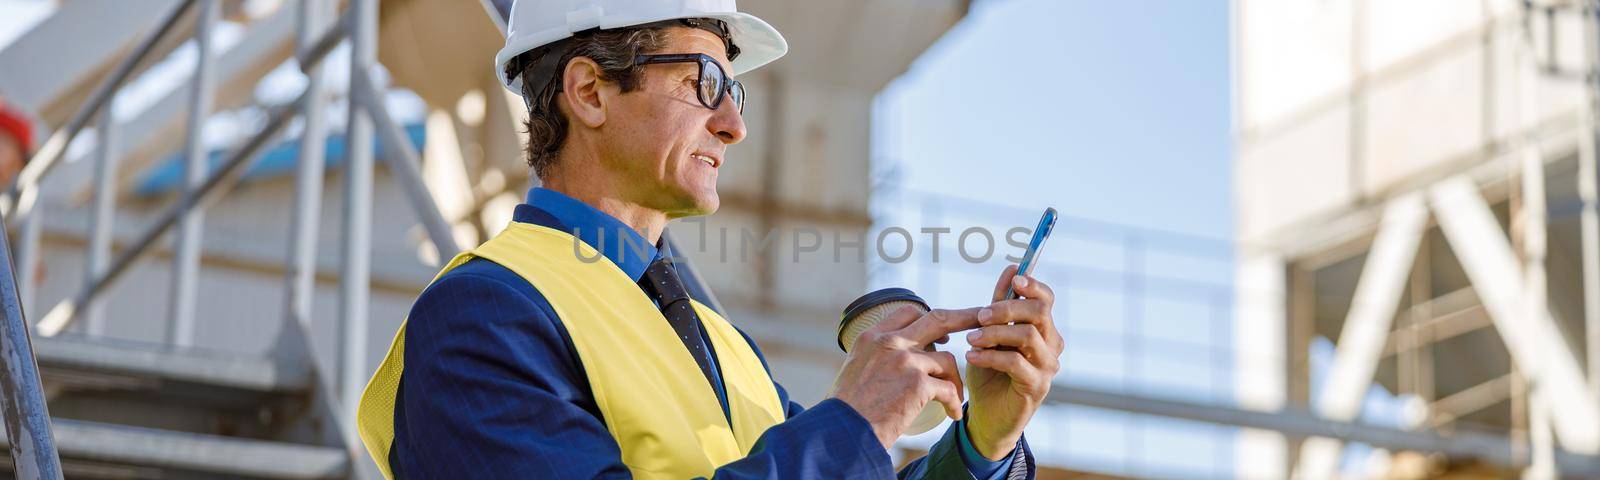 Matured man in work vest holding cup of coffee and texting message on smartphone